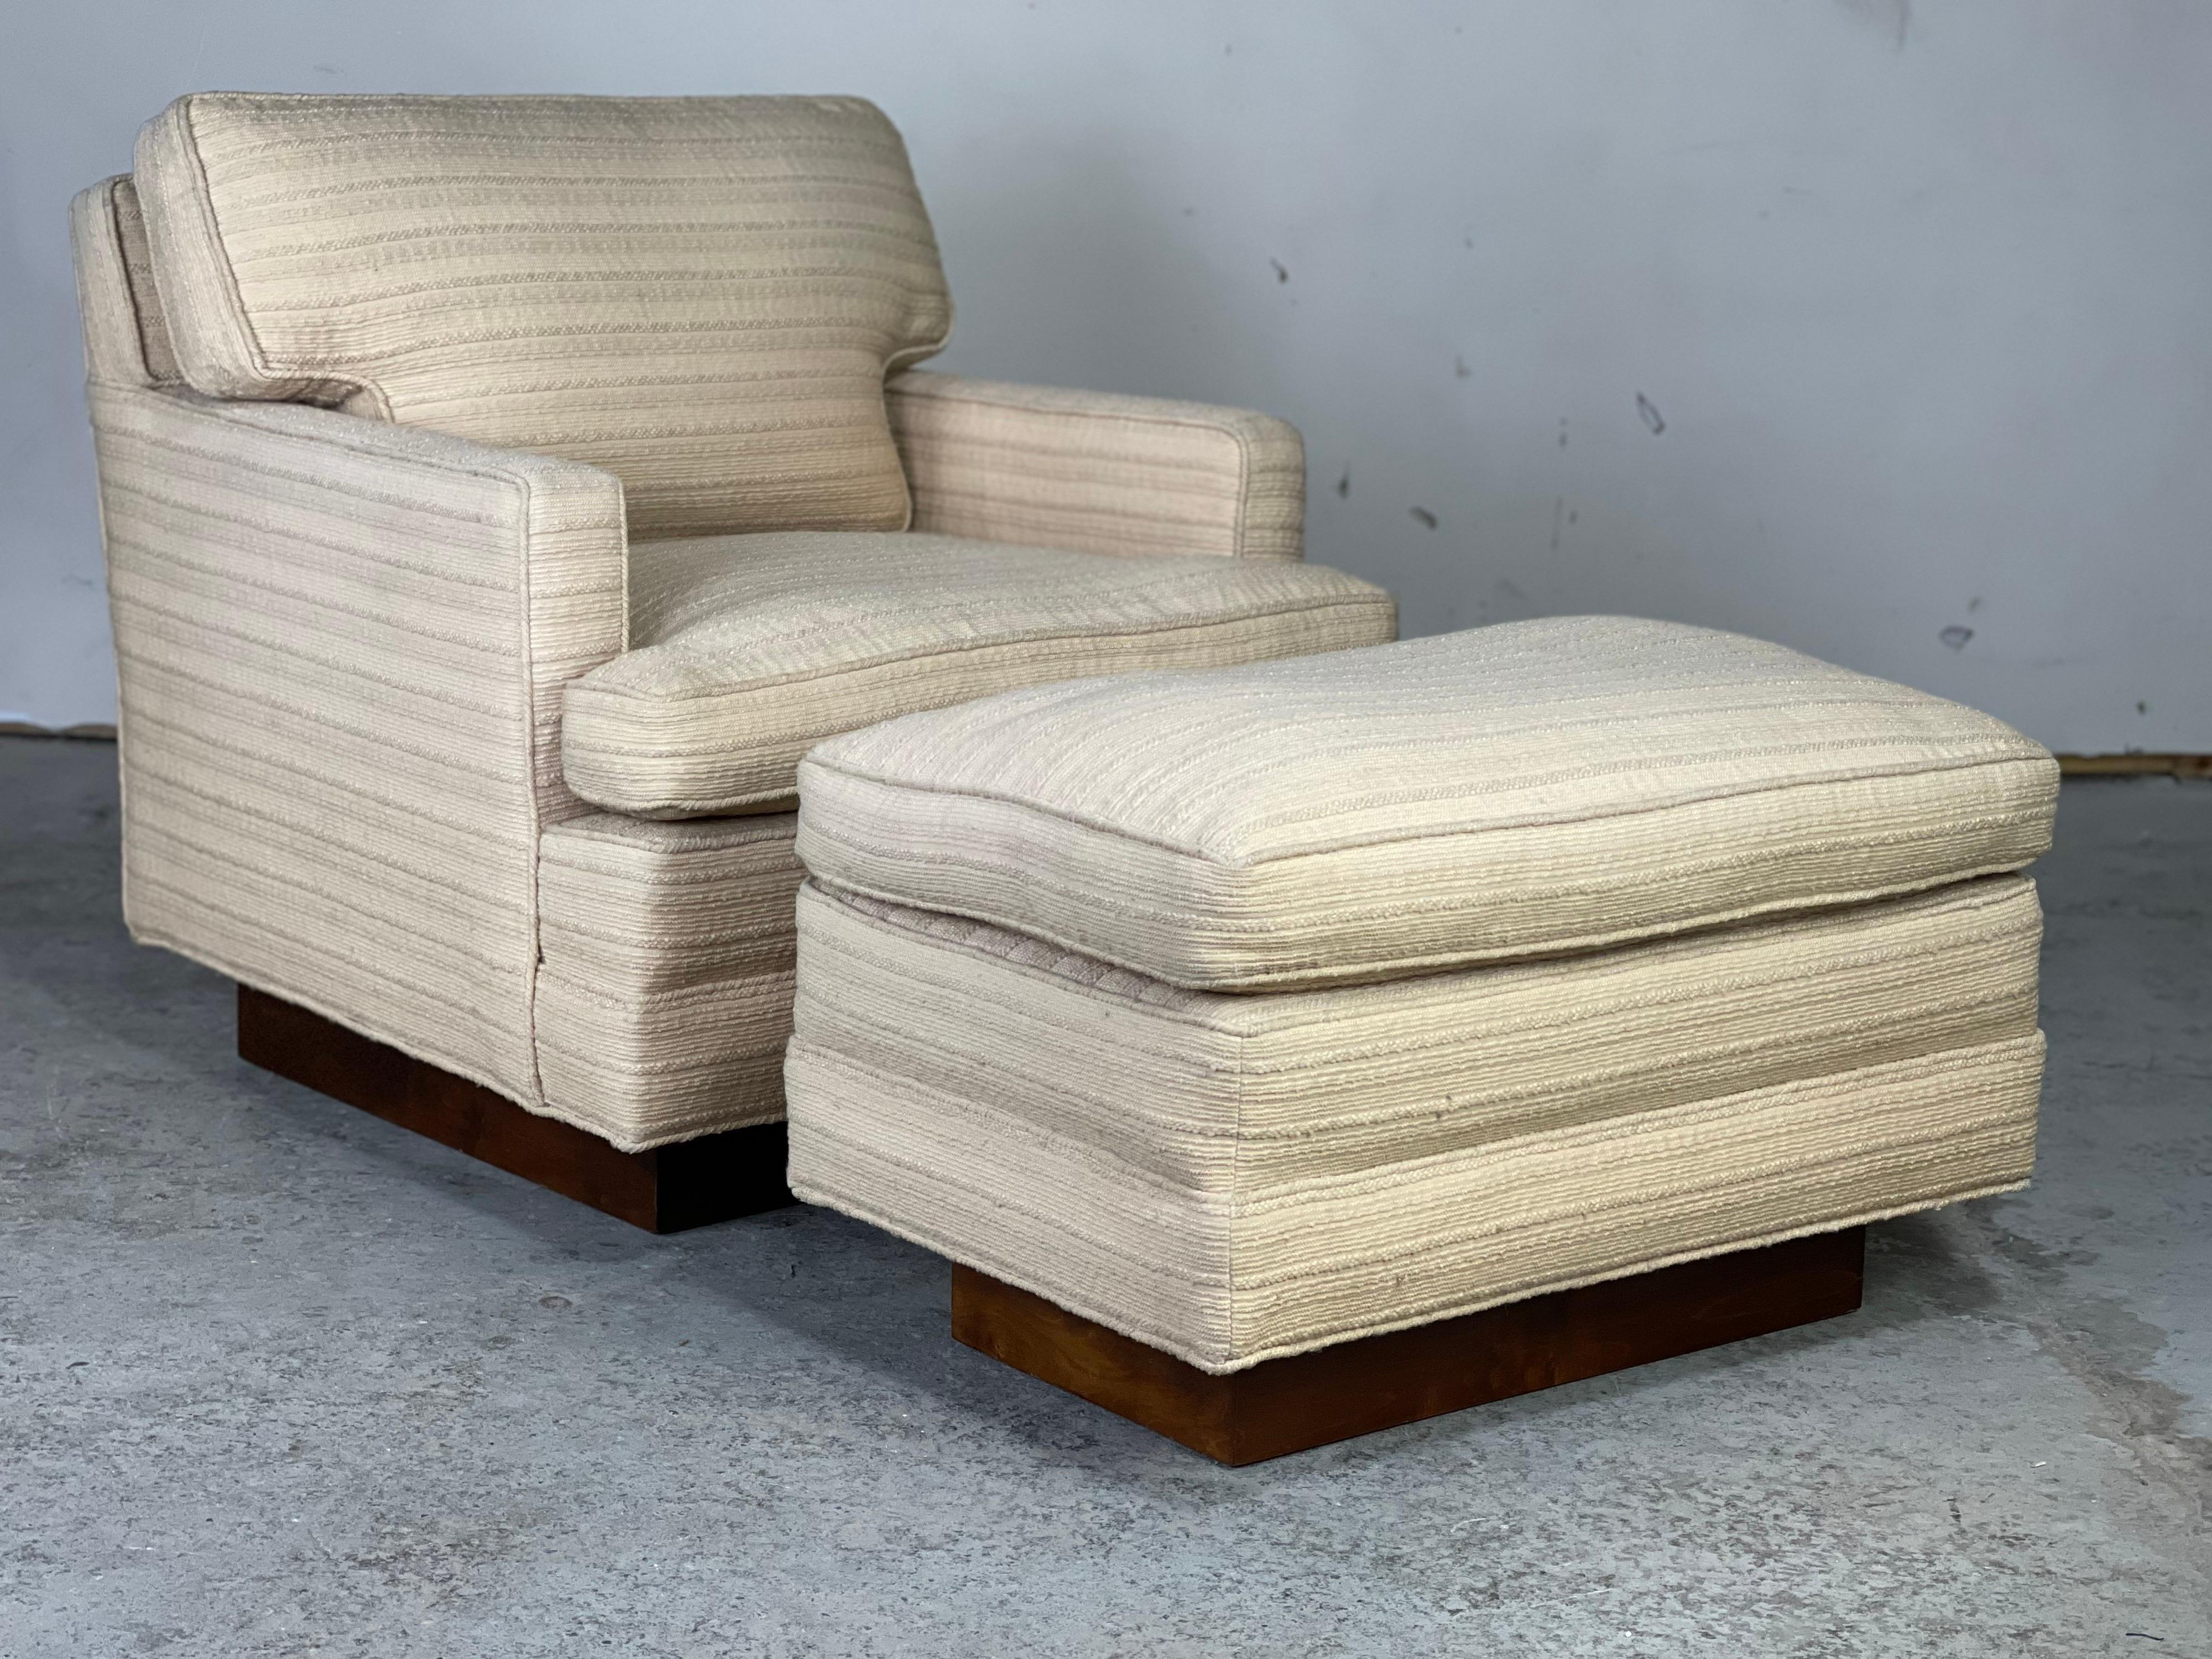 Classic Dunbar lounge chair and ottoman on custom ordered walnut plinth bases attributed to Edward Wormley for Dunbar Furniture Co. 
Duck down covered cushions - original upholstery is presentable and doesn't have stains but reupholstery is